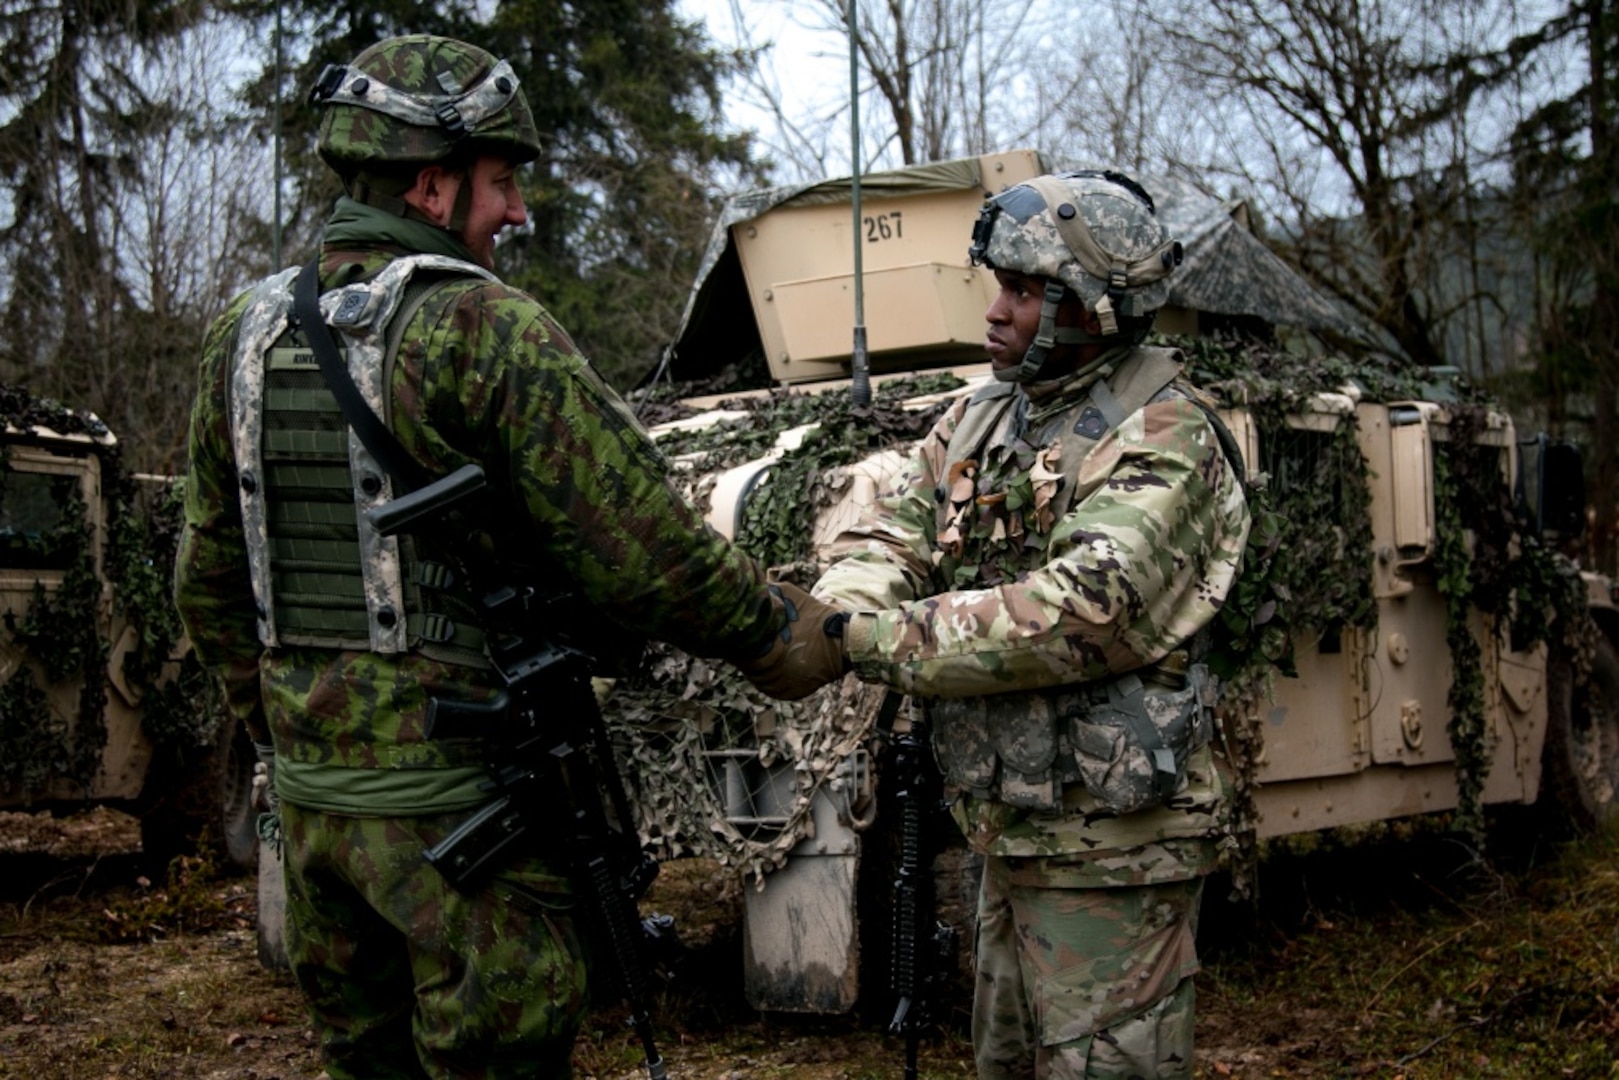 Sgt Azeez Bilaali (right), a psychological operations specialist assigned to 351st Tactical Psychological Operations Company in Fort Totten, N.Y., shakes hands with Sgt. Rimas Rimkus, a soldier in the Lithuanian armed forces, after a mission brief during the Allied Spirit VII training evercise in Grafenwoehr, Germany on Nov. 17, 2017. The U.S. Army, along with its allies and partners, continues to forge a dynamic presence with a powerful land network that simultaneously deters aggression and assures the security of the region. Approximately 3,700 service members from 13 nations gathered in 7th Army Training Command’s Hohenfels Training Area in southeastern Germany to participate in the seventh iteration of Allied Spirit, which is scheduled from Oct. 30 - Nov. 22, 2017. (U.S. Army photo by Spc. Dustin D. Biven / 22nd Mobile Public Affairs Detachment)